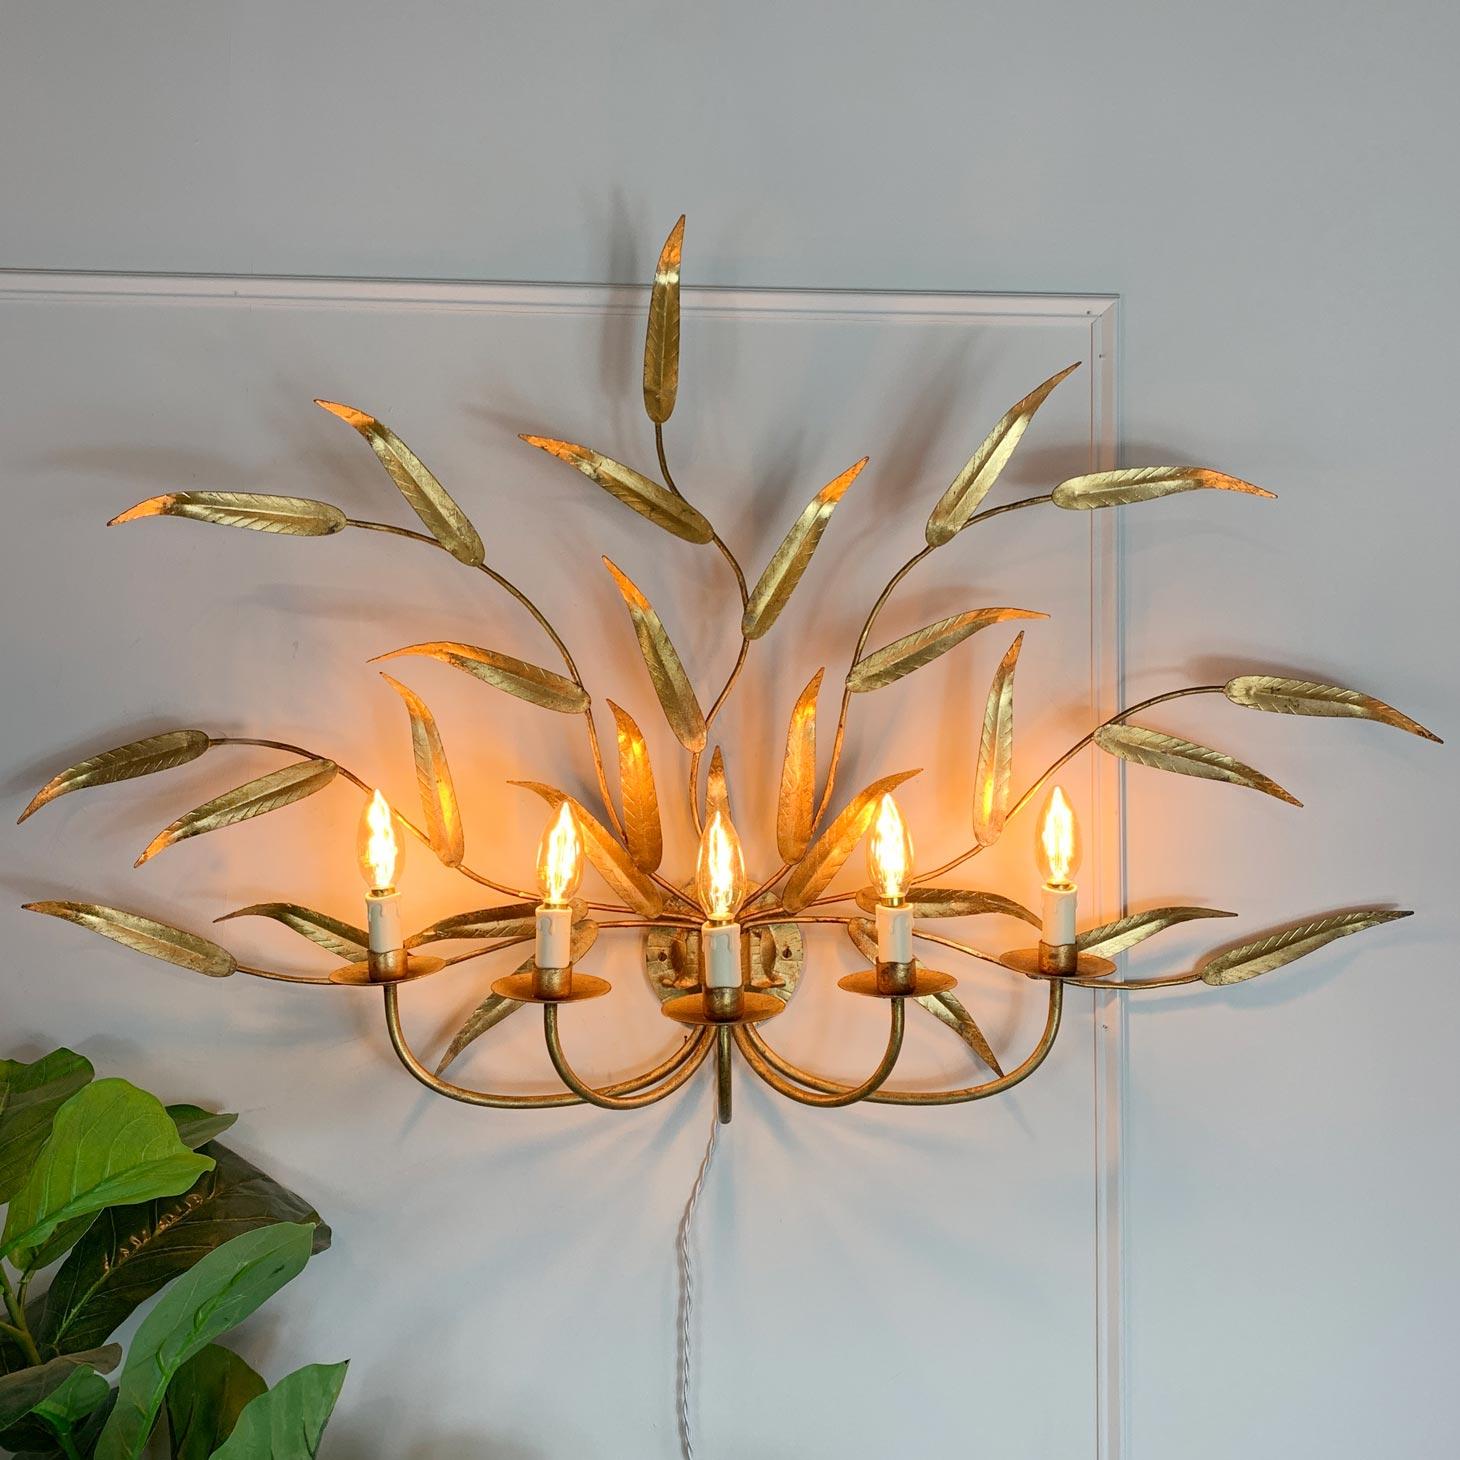 A super gilt iron wall light of enormous proportions, by Ferro Art, Spain. Detailed gilt leaves profusely decorate the light, while the five single bulb lamp holders stretch out from the central rose on curved arms.

The gilt is in fabulous